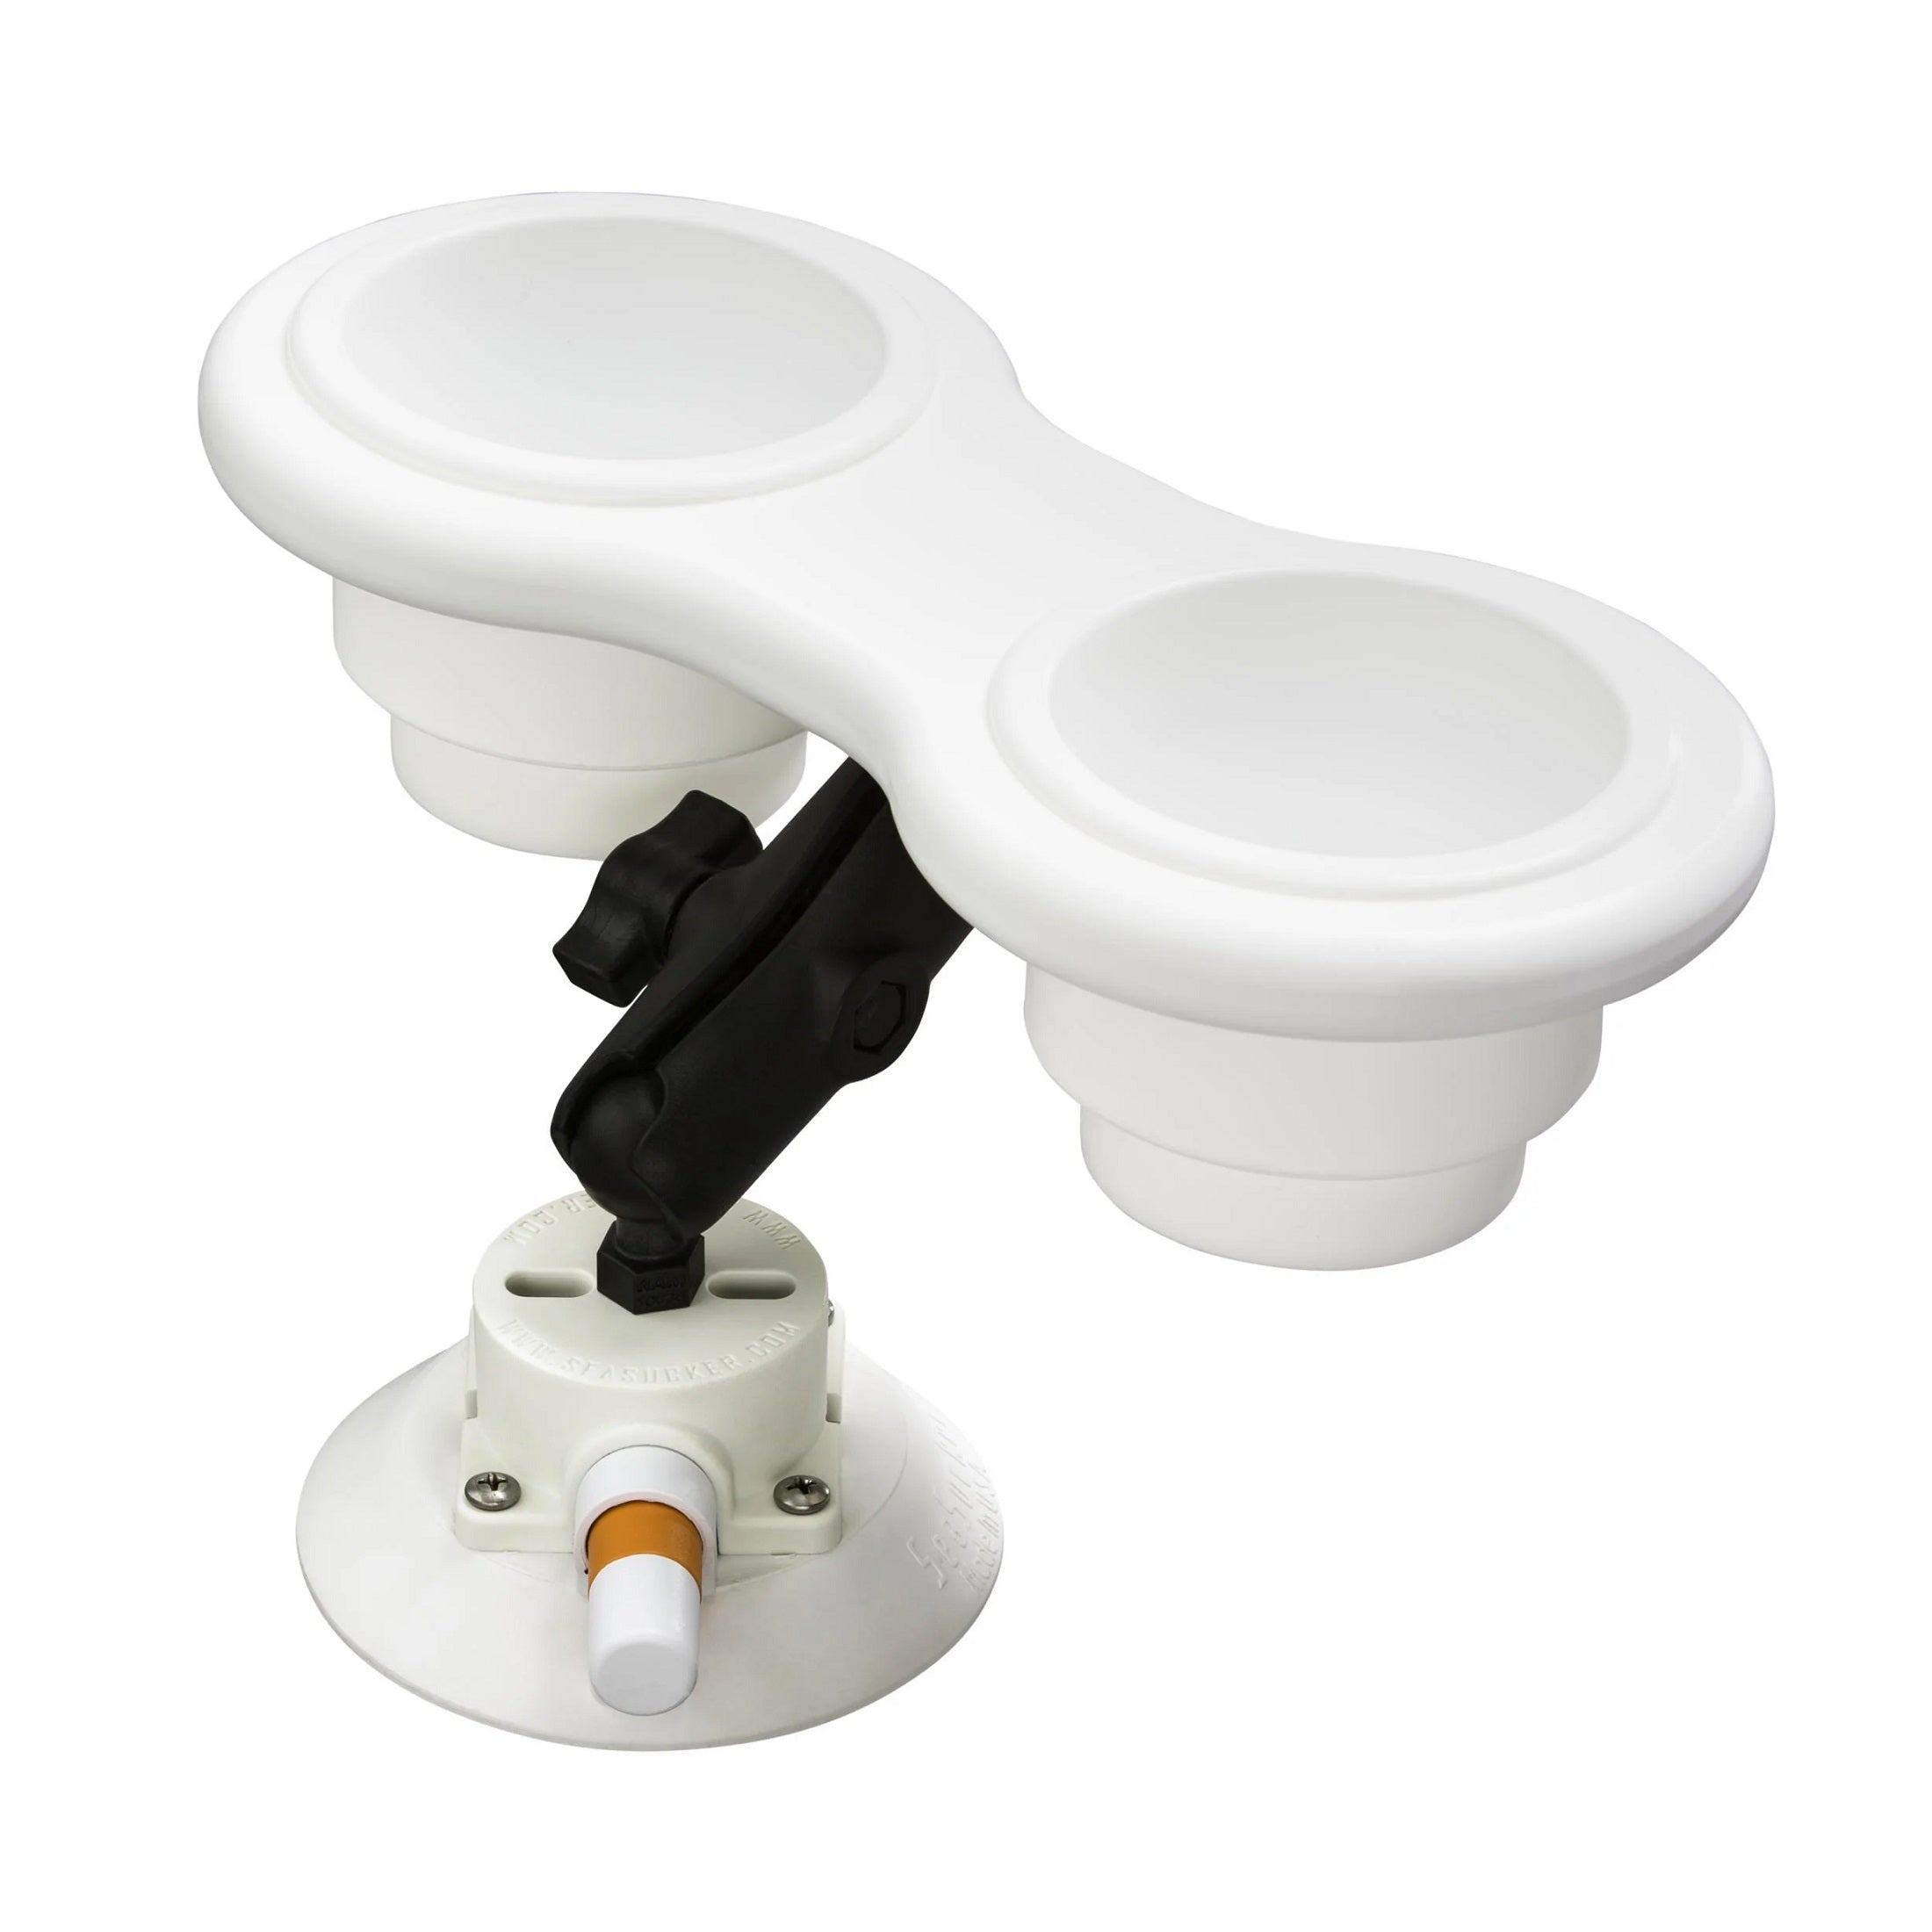 2 Cup Holder with Angle Mount